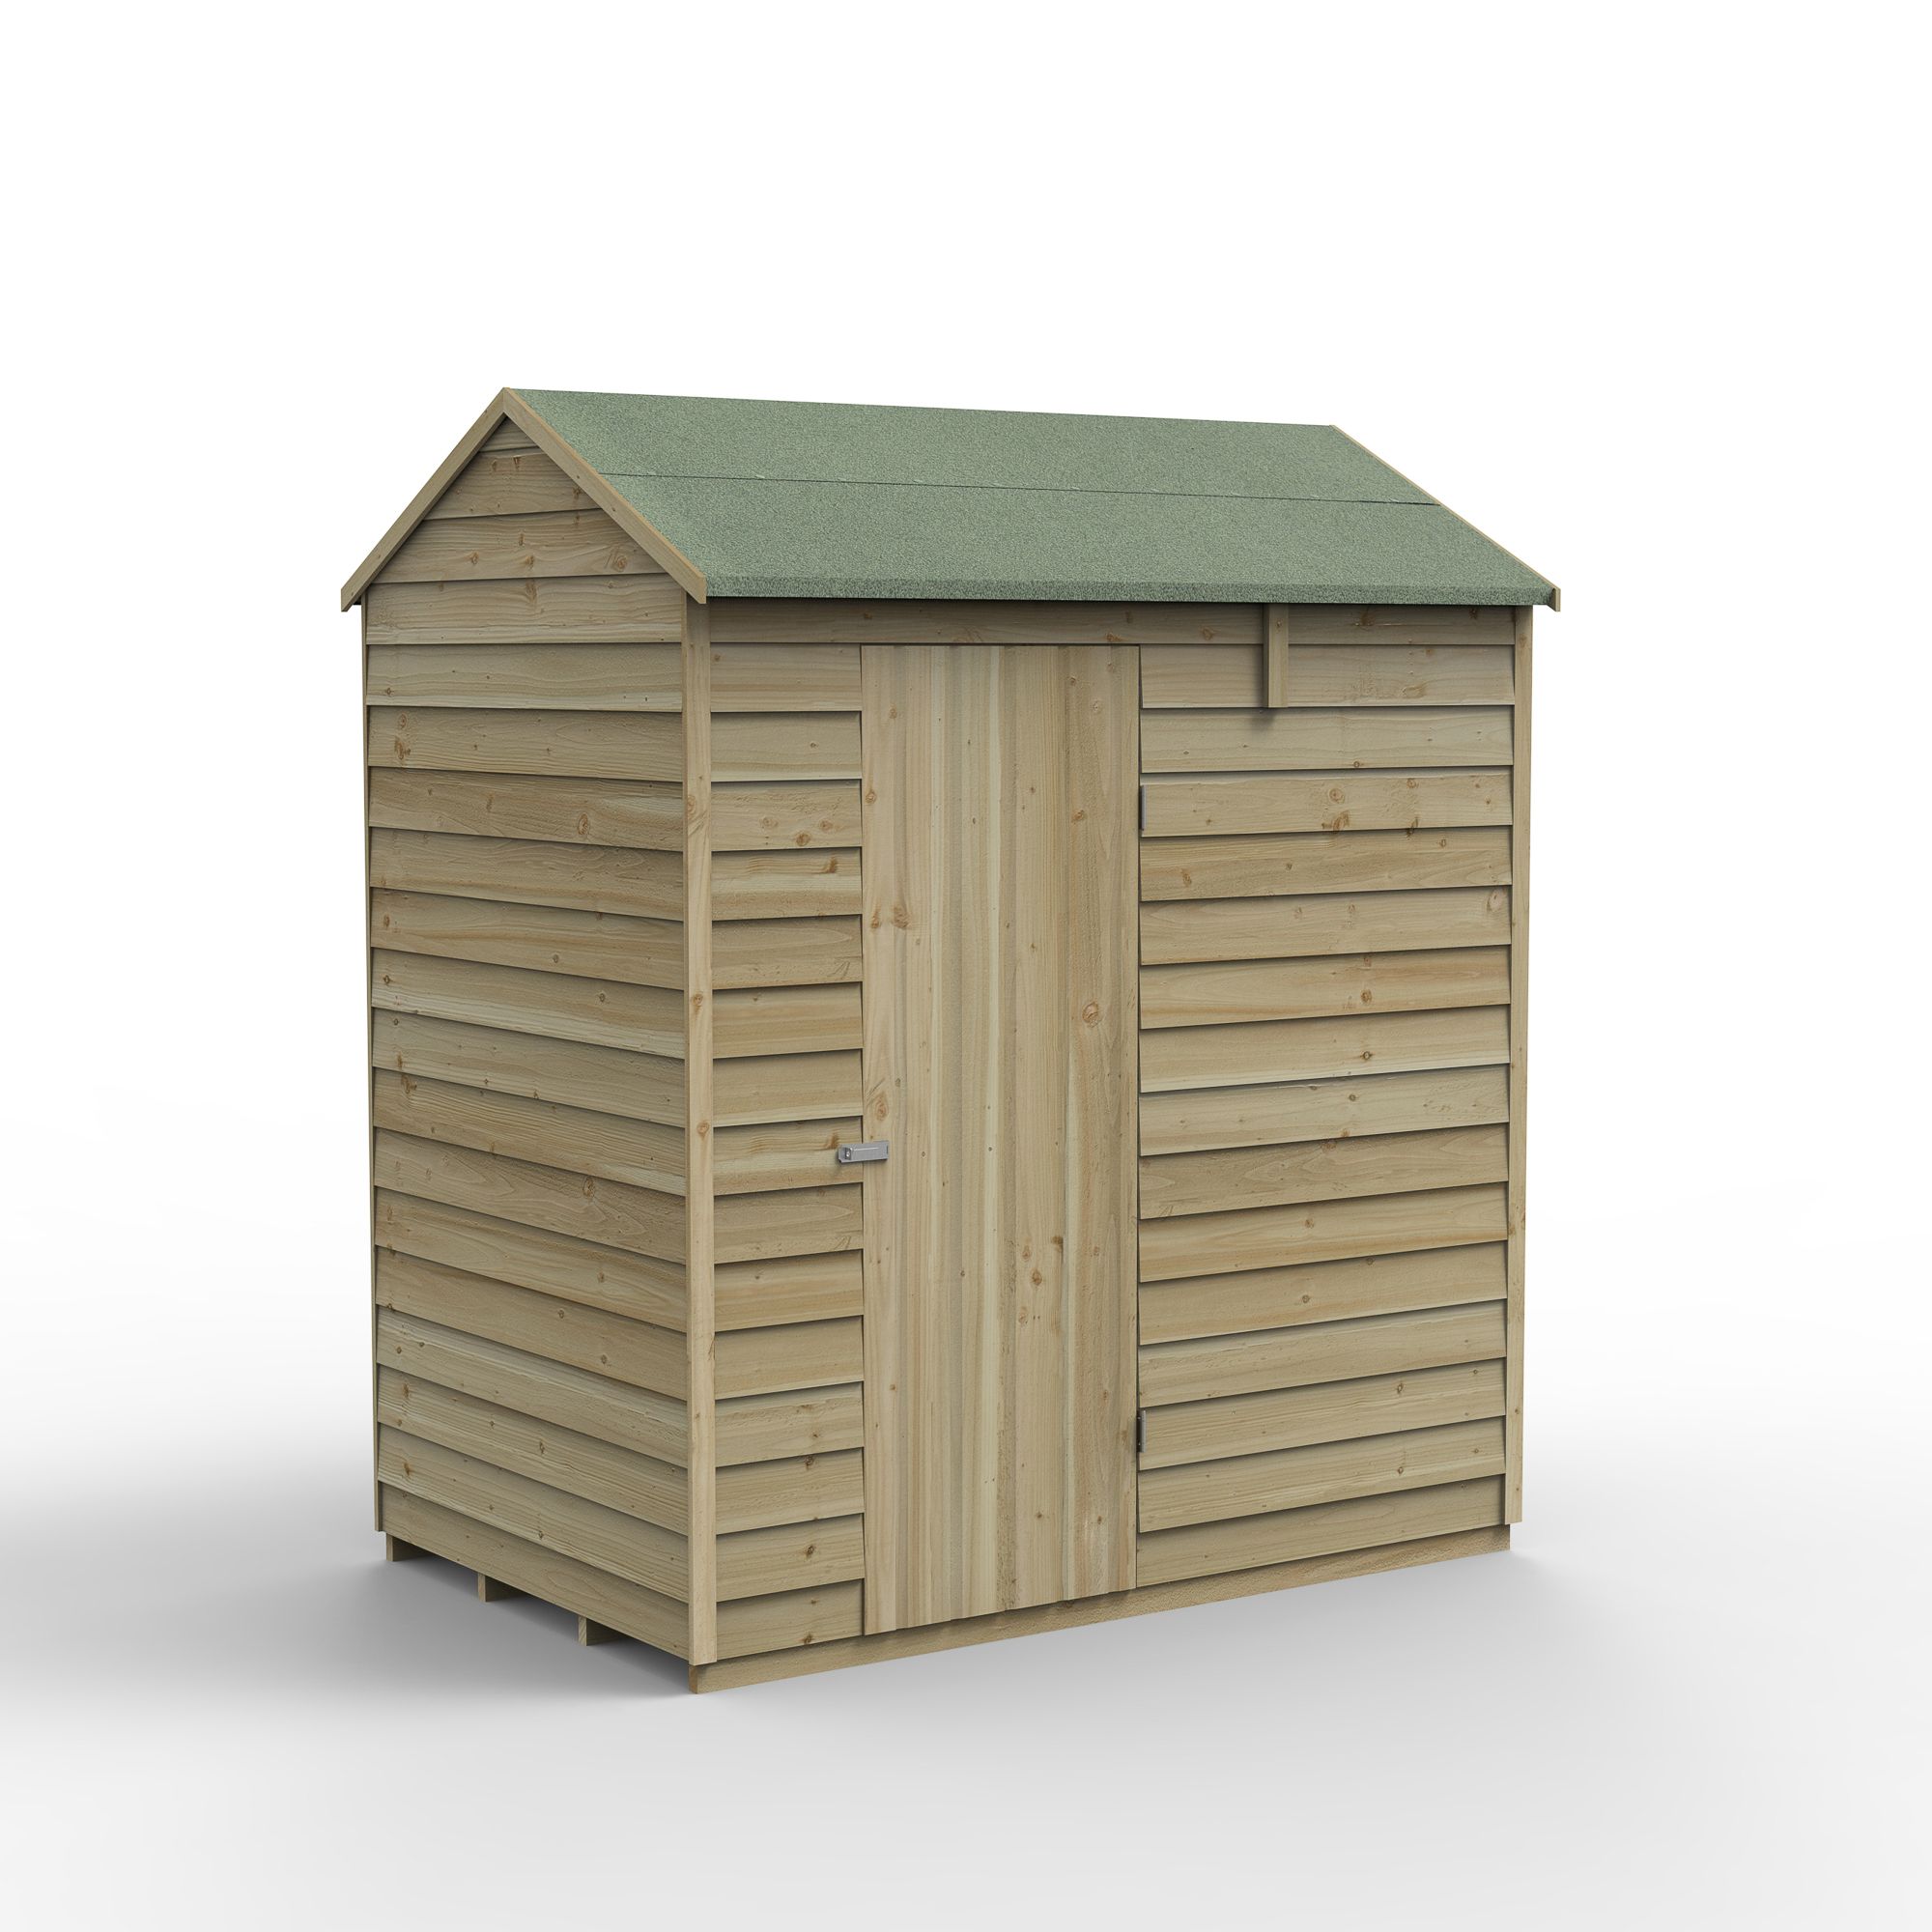 Forest Garden Overlap 6x4 ft Reverse apex Wooden Shed with floor - Assembly service included